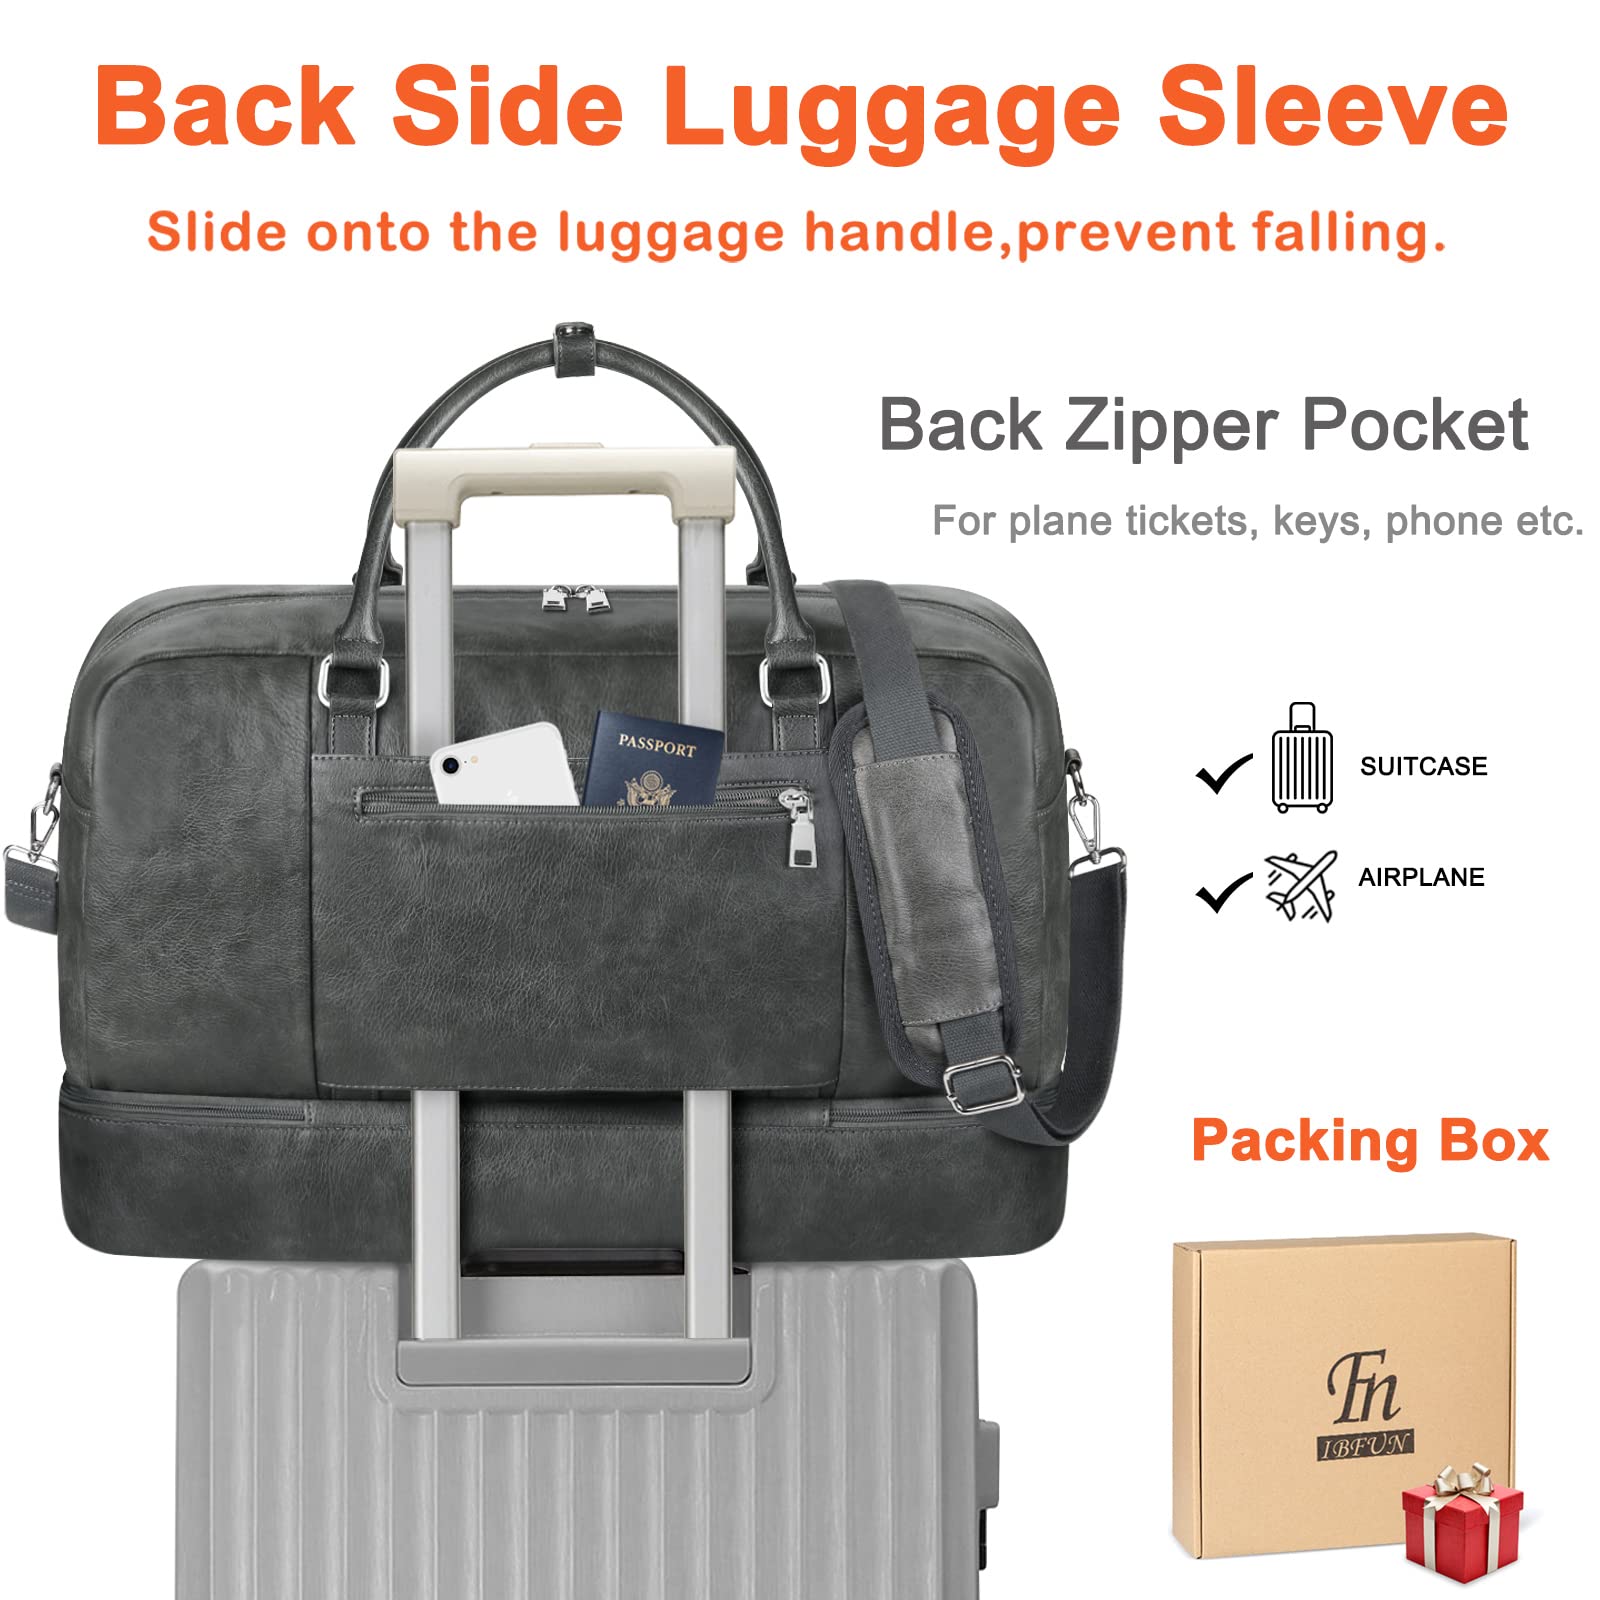 Large Capacity Water-proof Travel Bag-I2601